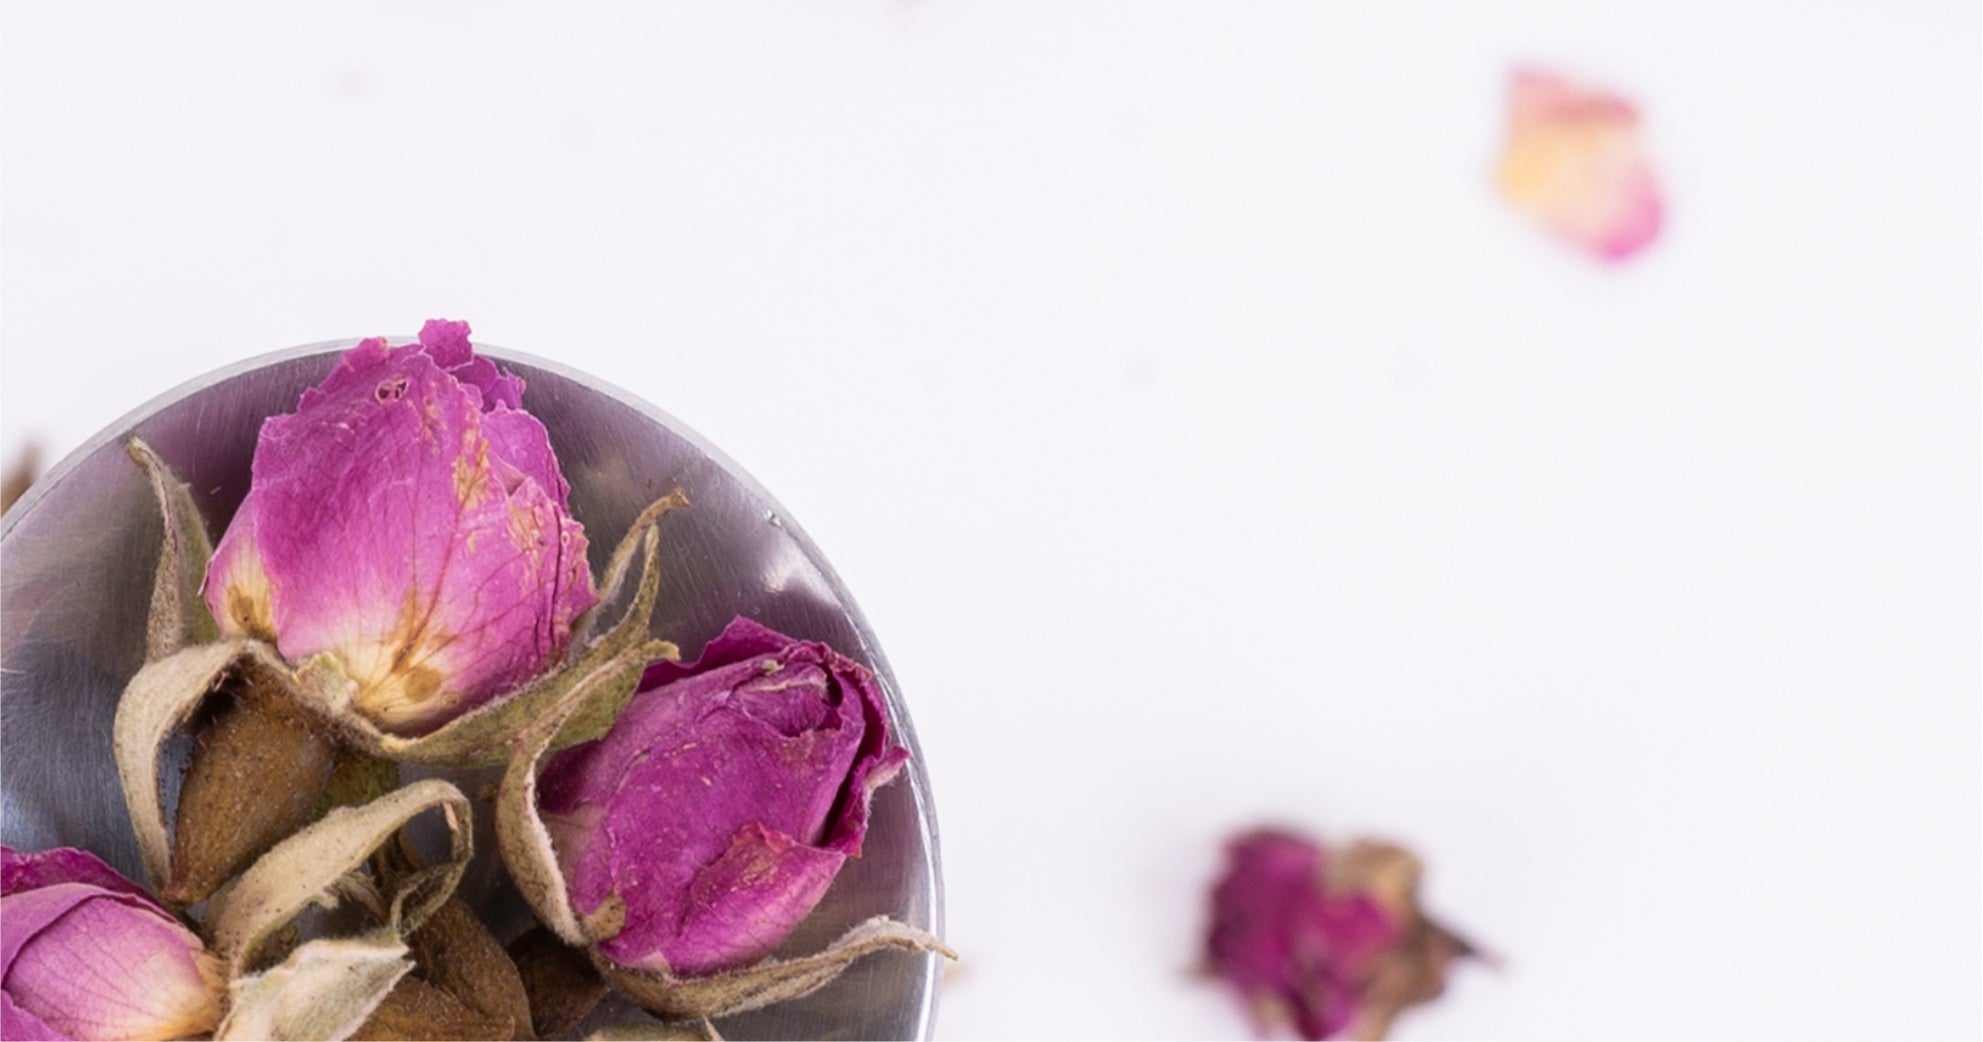 Dried rose petals in a silver spoon on a white background.